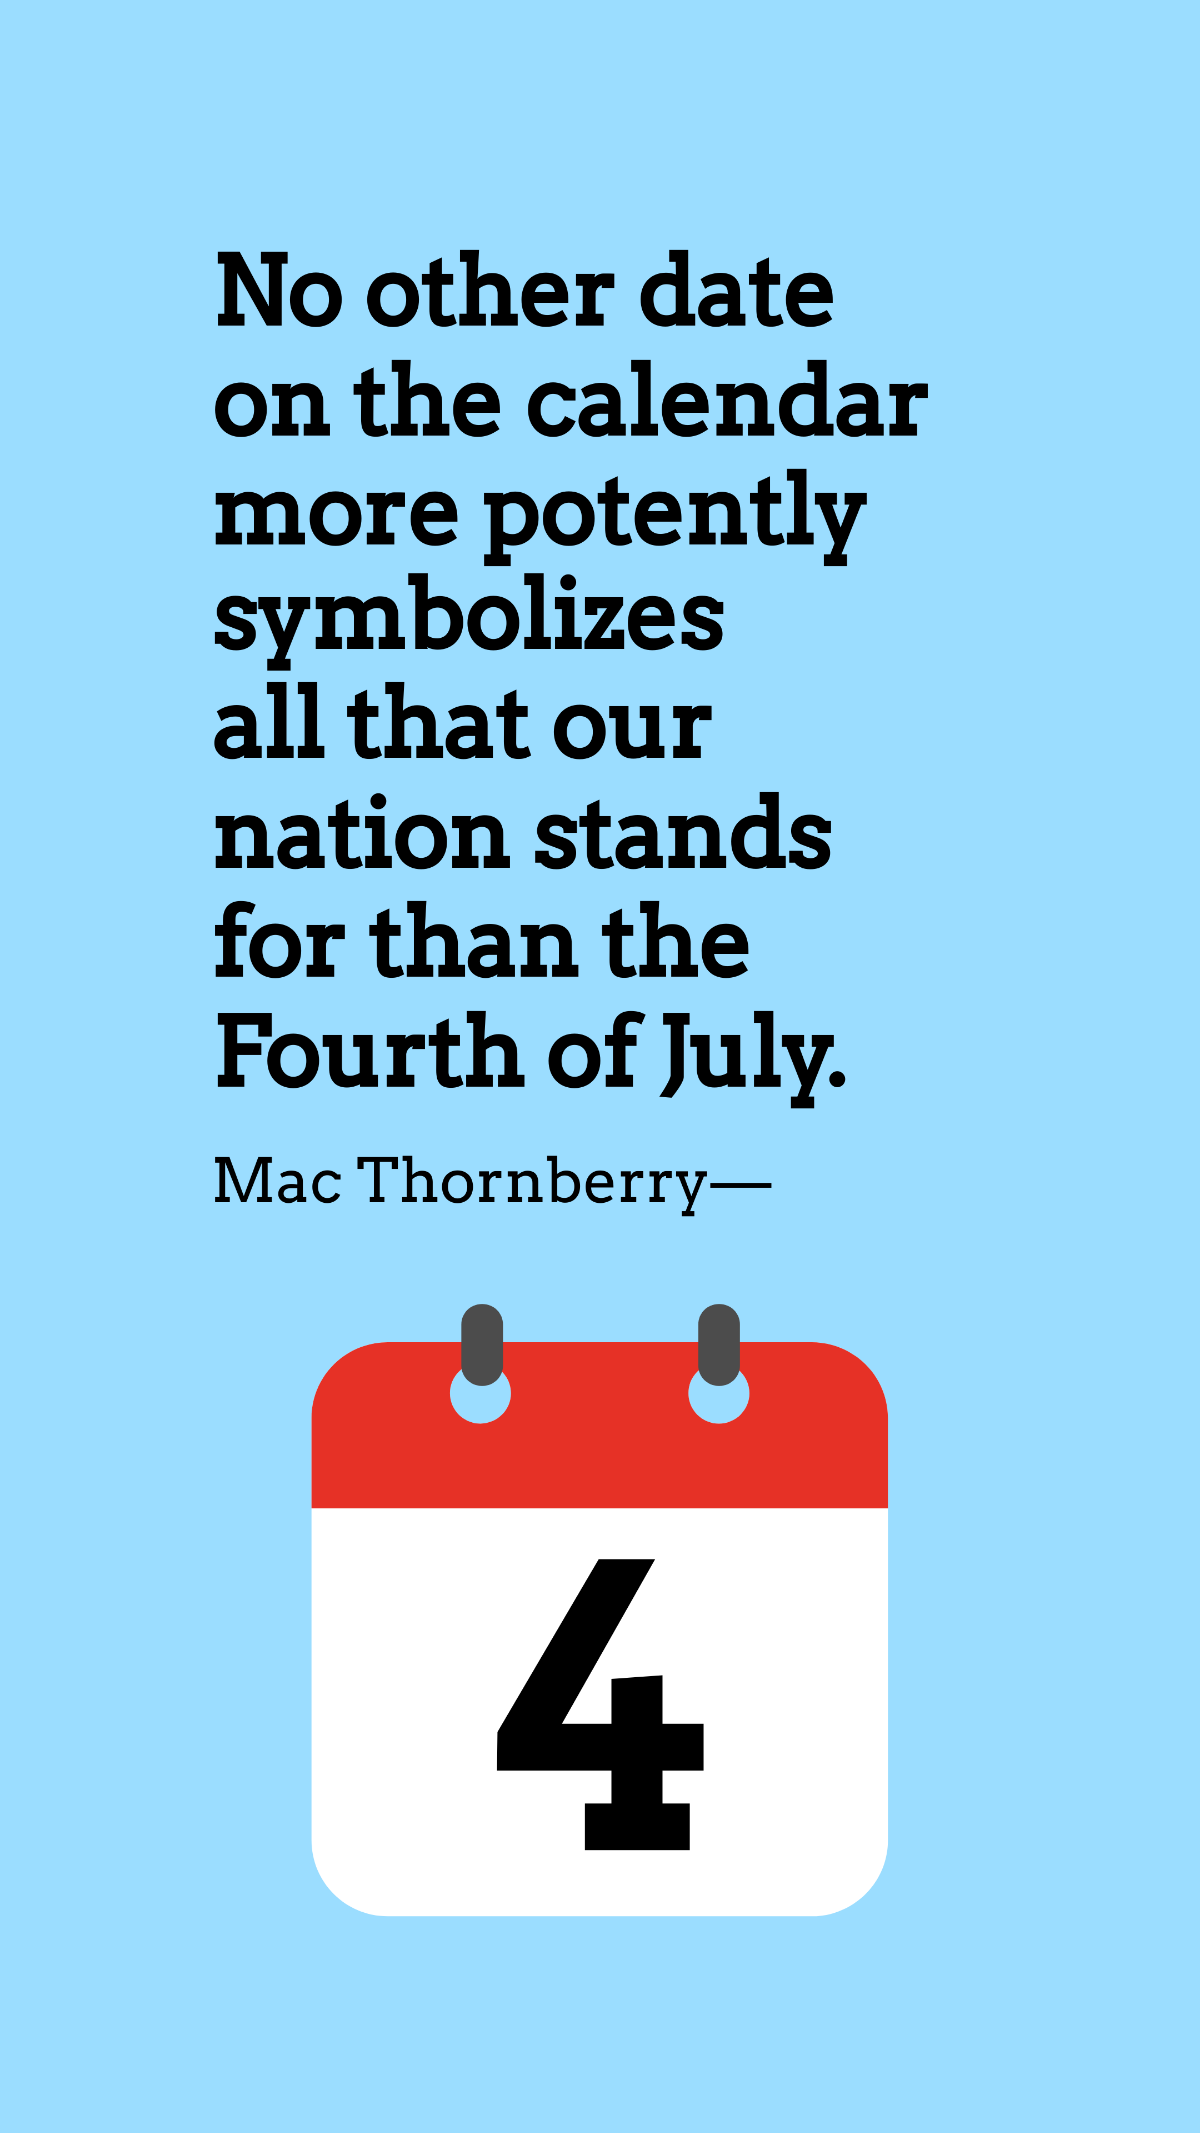 Mac Thornberry - No other date on the calendar more potently symbolizes all that our nation stands for than the Fourth of July. Template